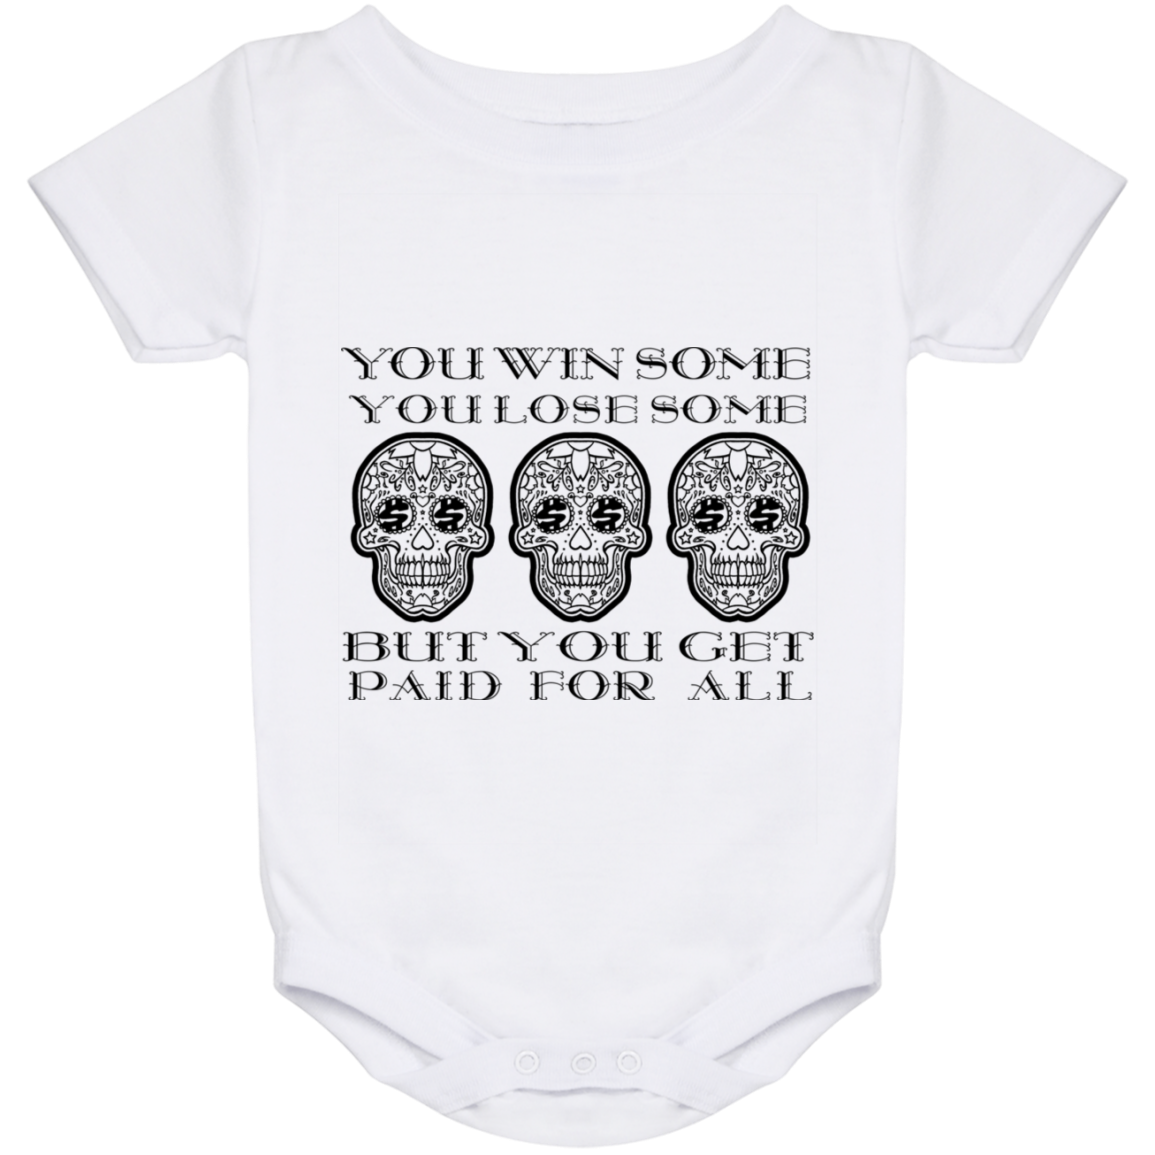 ArtichokeUSA Custom Design. You Win Some, You Lose Some, But You Get Paid For All. Baby Onesie 24 Month